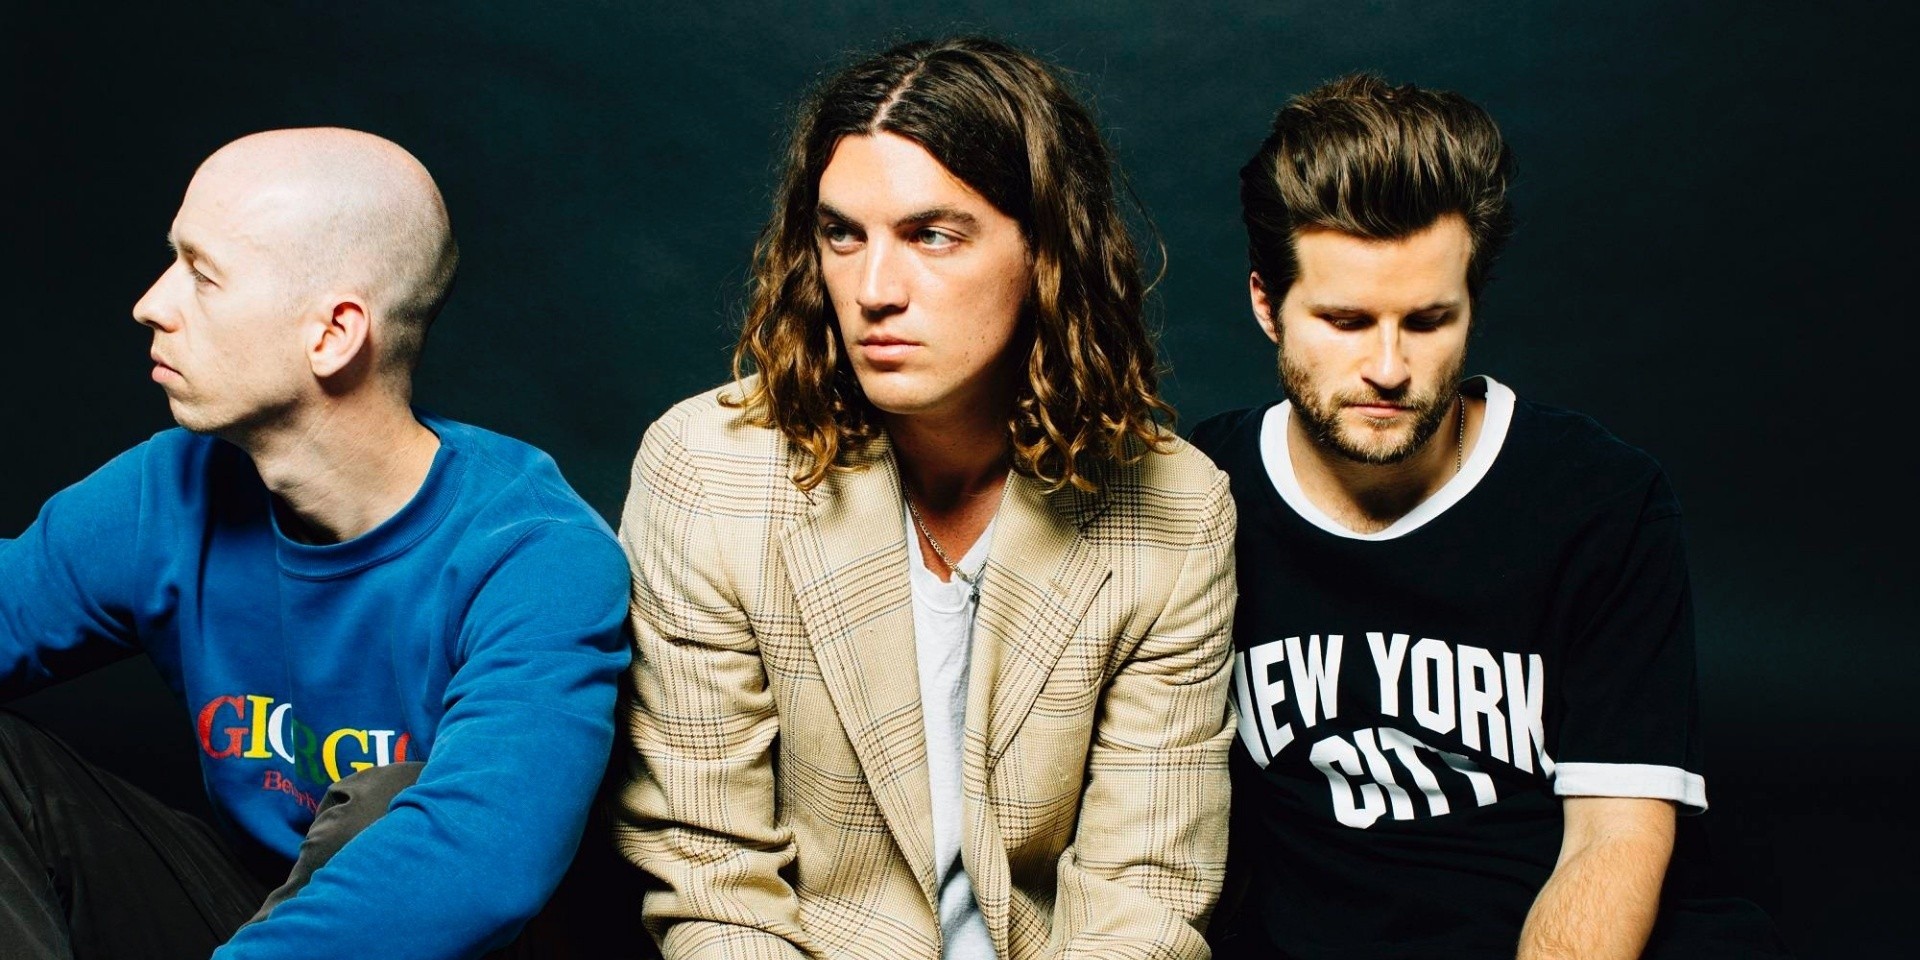 LANY releases new music video 'Taking Me Back' - watch